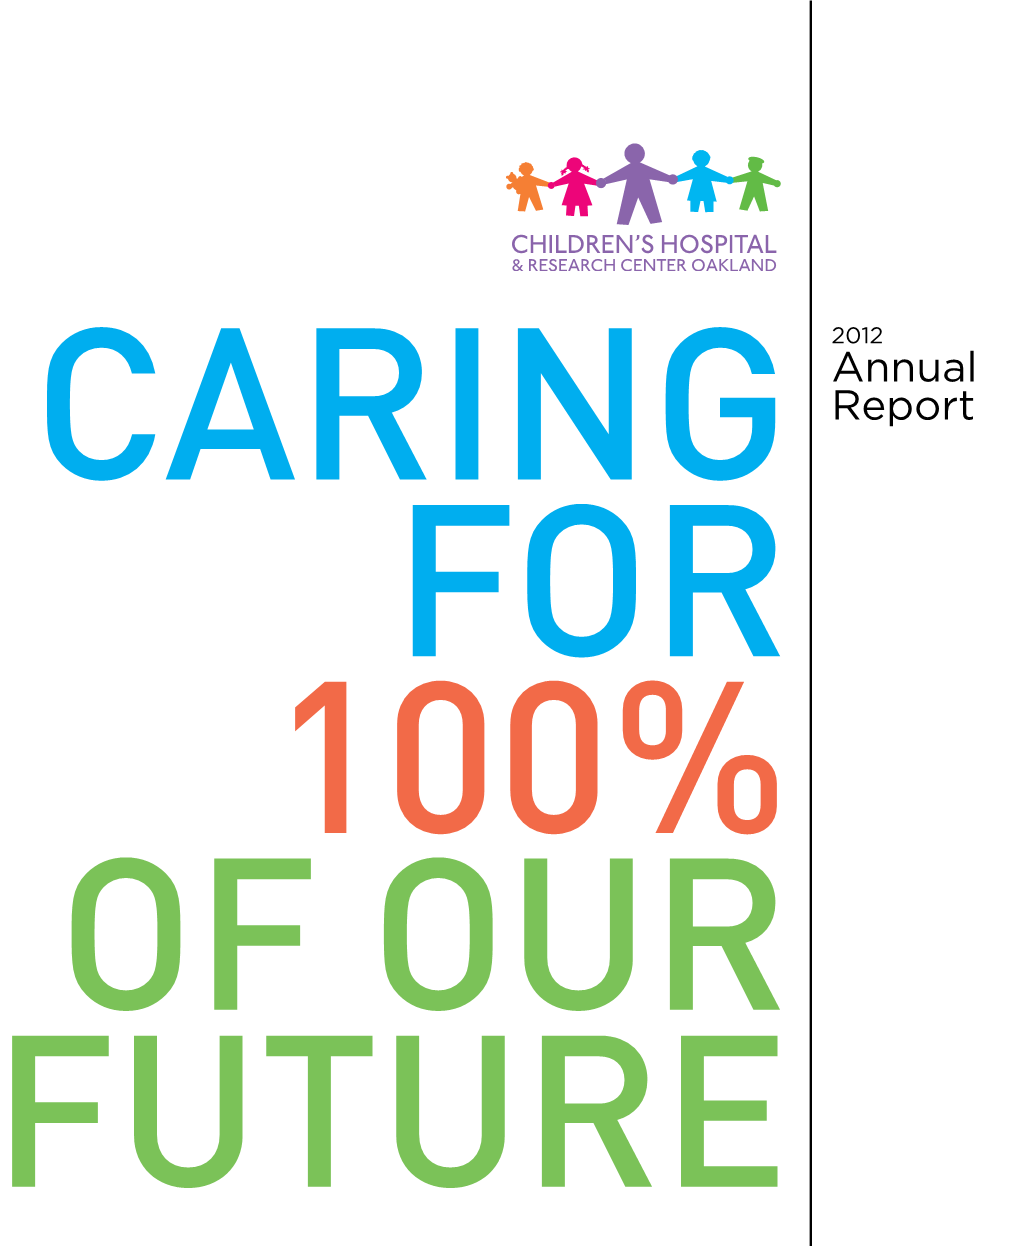 Annual Report 2012 6 Caring for 100% of Our Future Upholding Our 100-Year-Old Mission